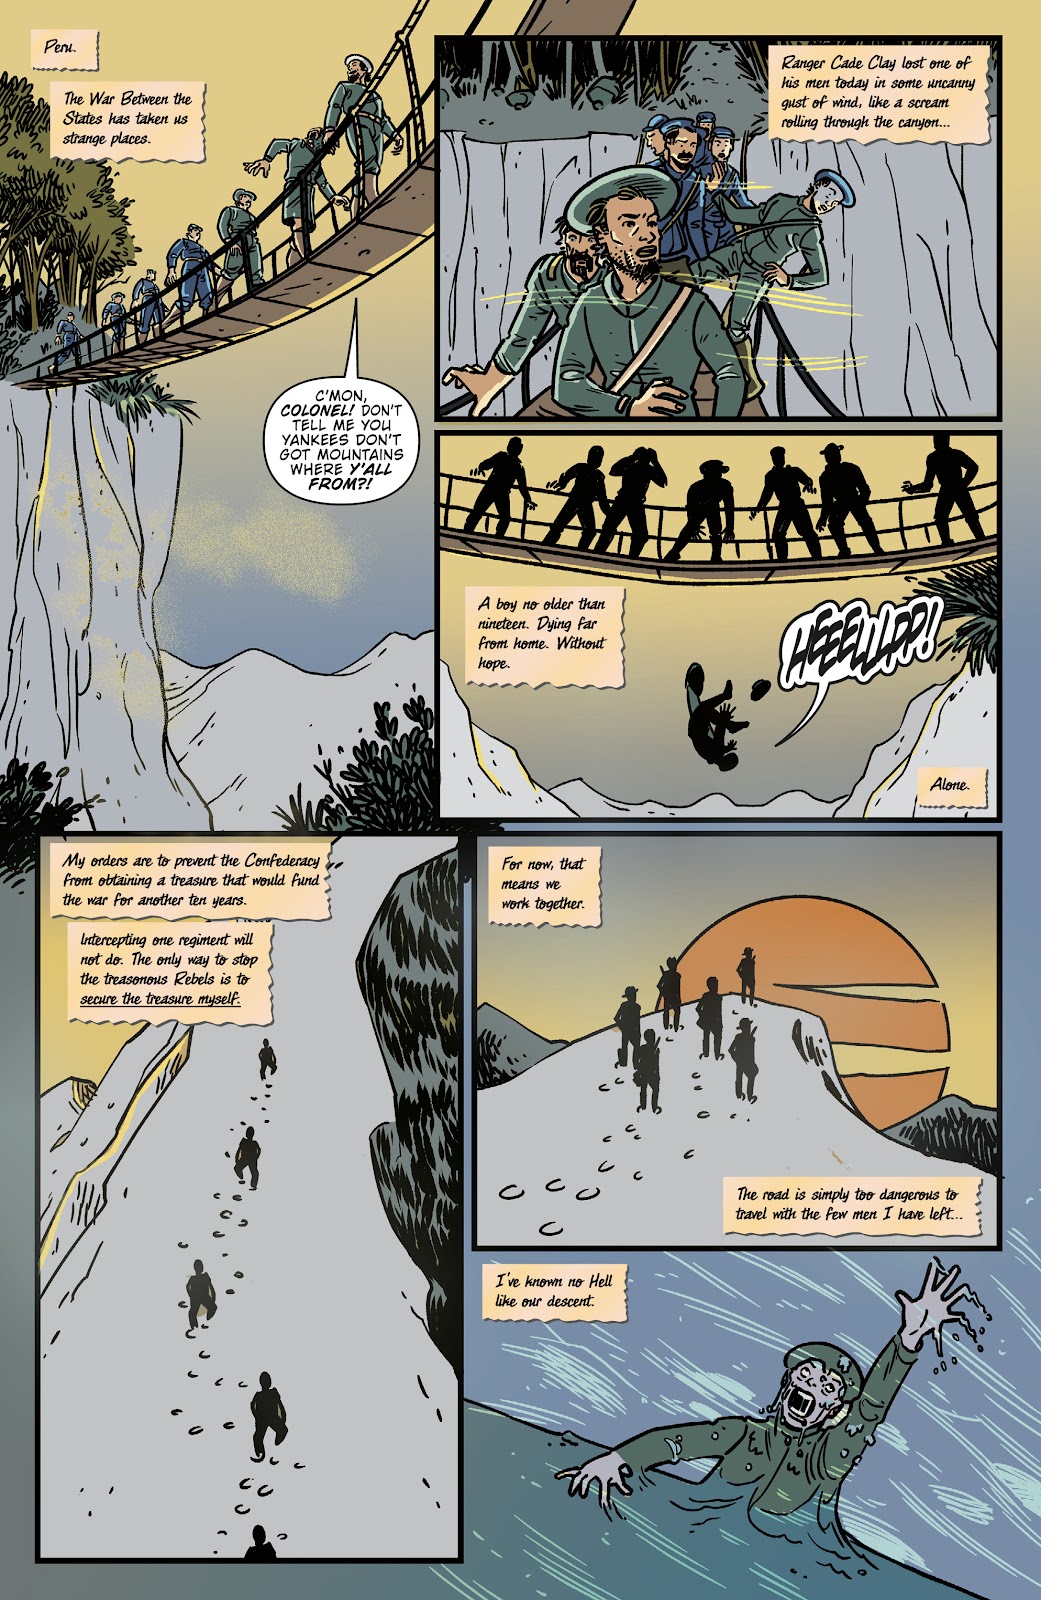 Cult Classic: Return to Whisper issue 2 & 3 - Page 33